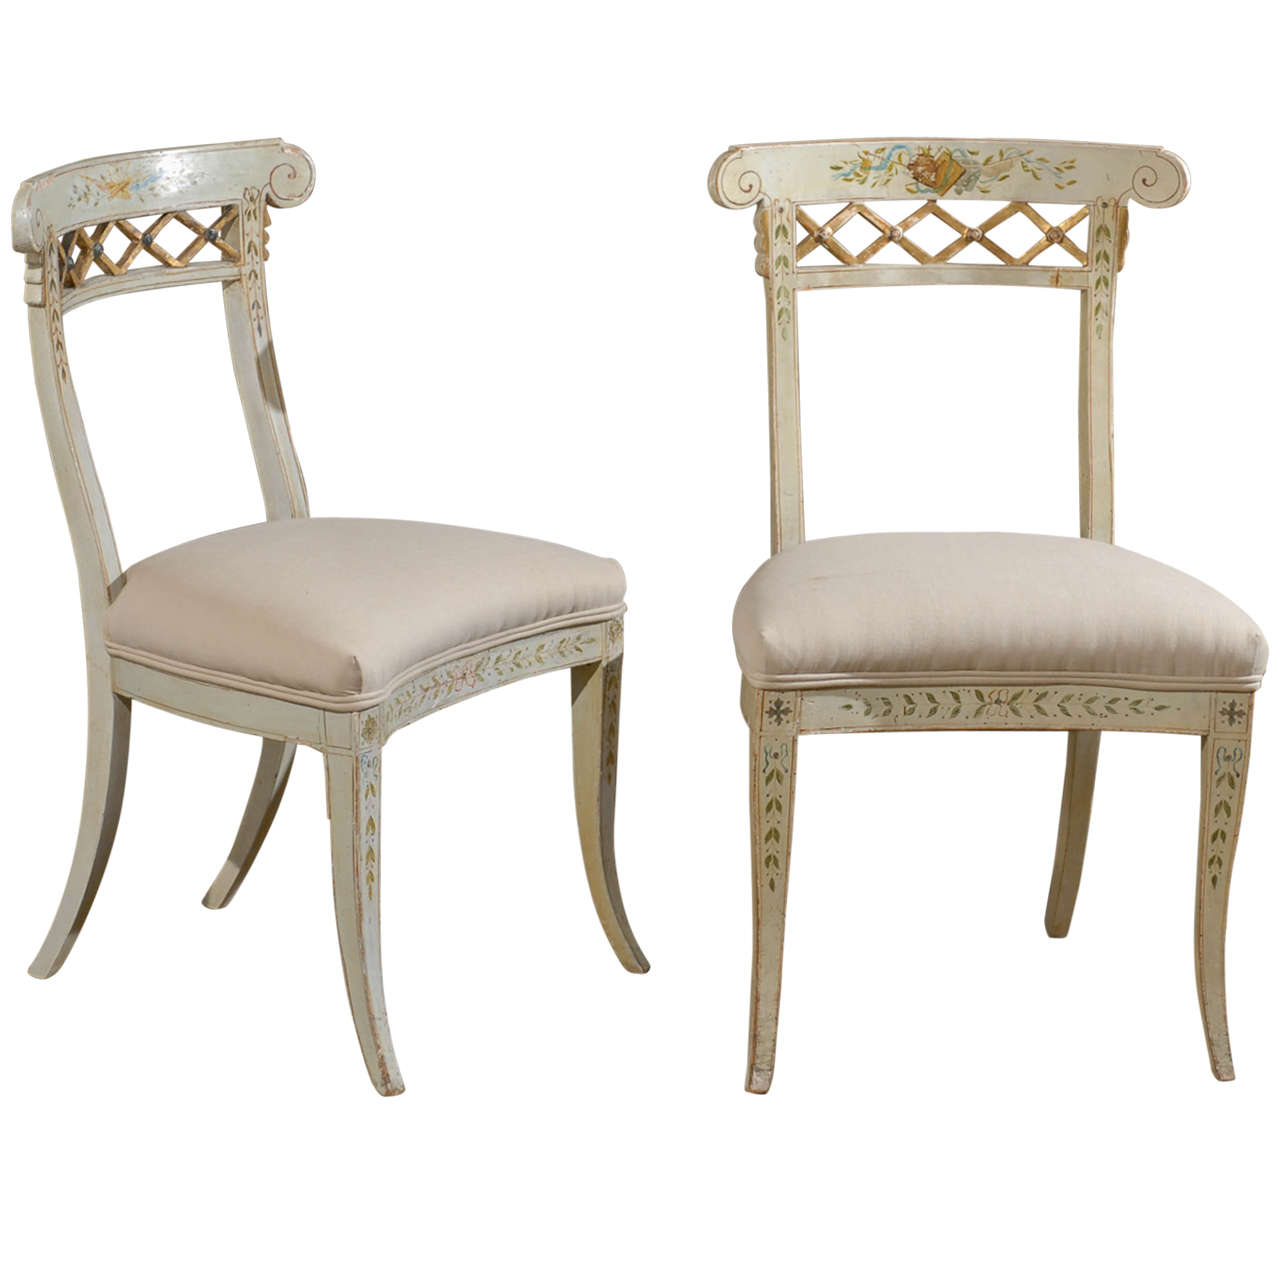 Set of Four Italian 1790s Neoclassical Period Music Chairs with Gilded Trellis For Sale